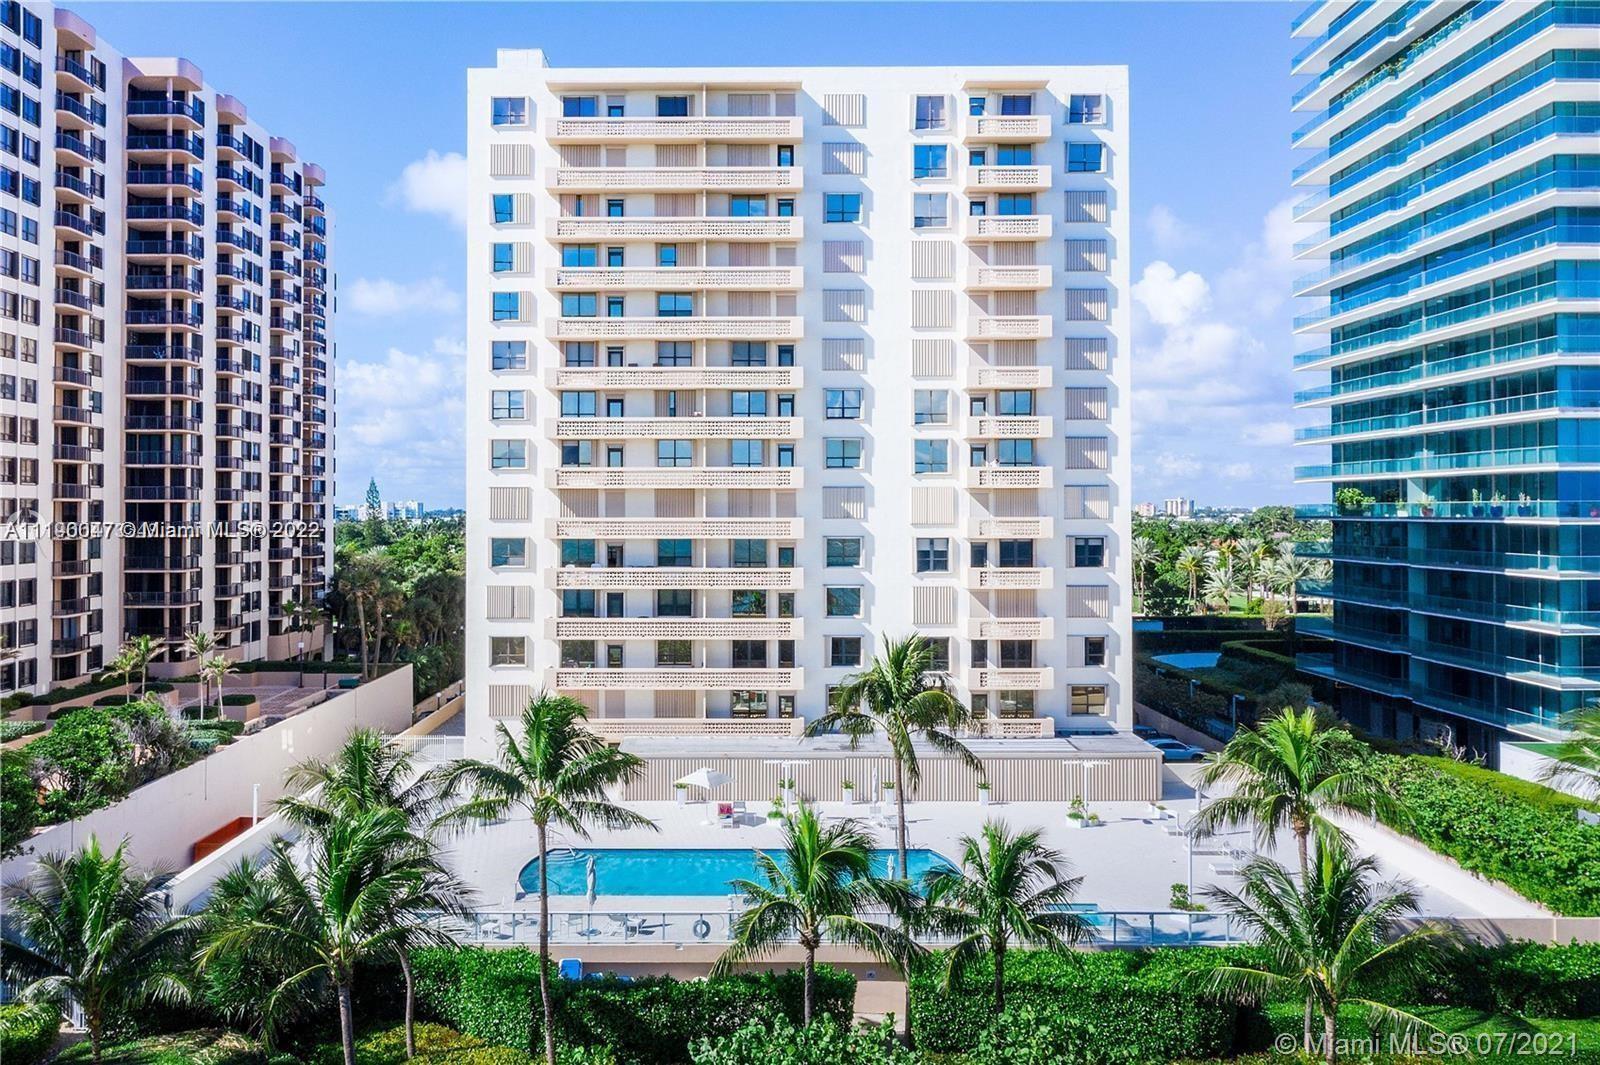 Lovely apartment in the heat of Bal Harbour. 1 bedroom 1 & half bath for your guest. Tiles throughou